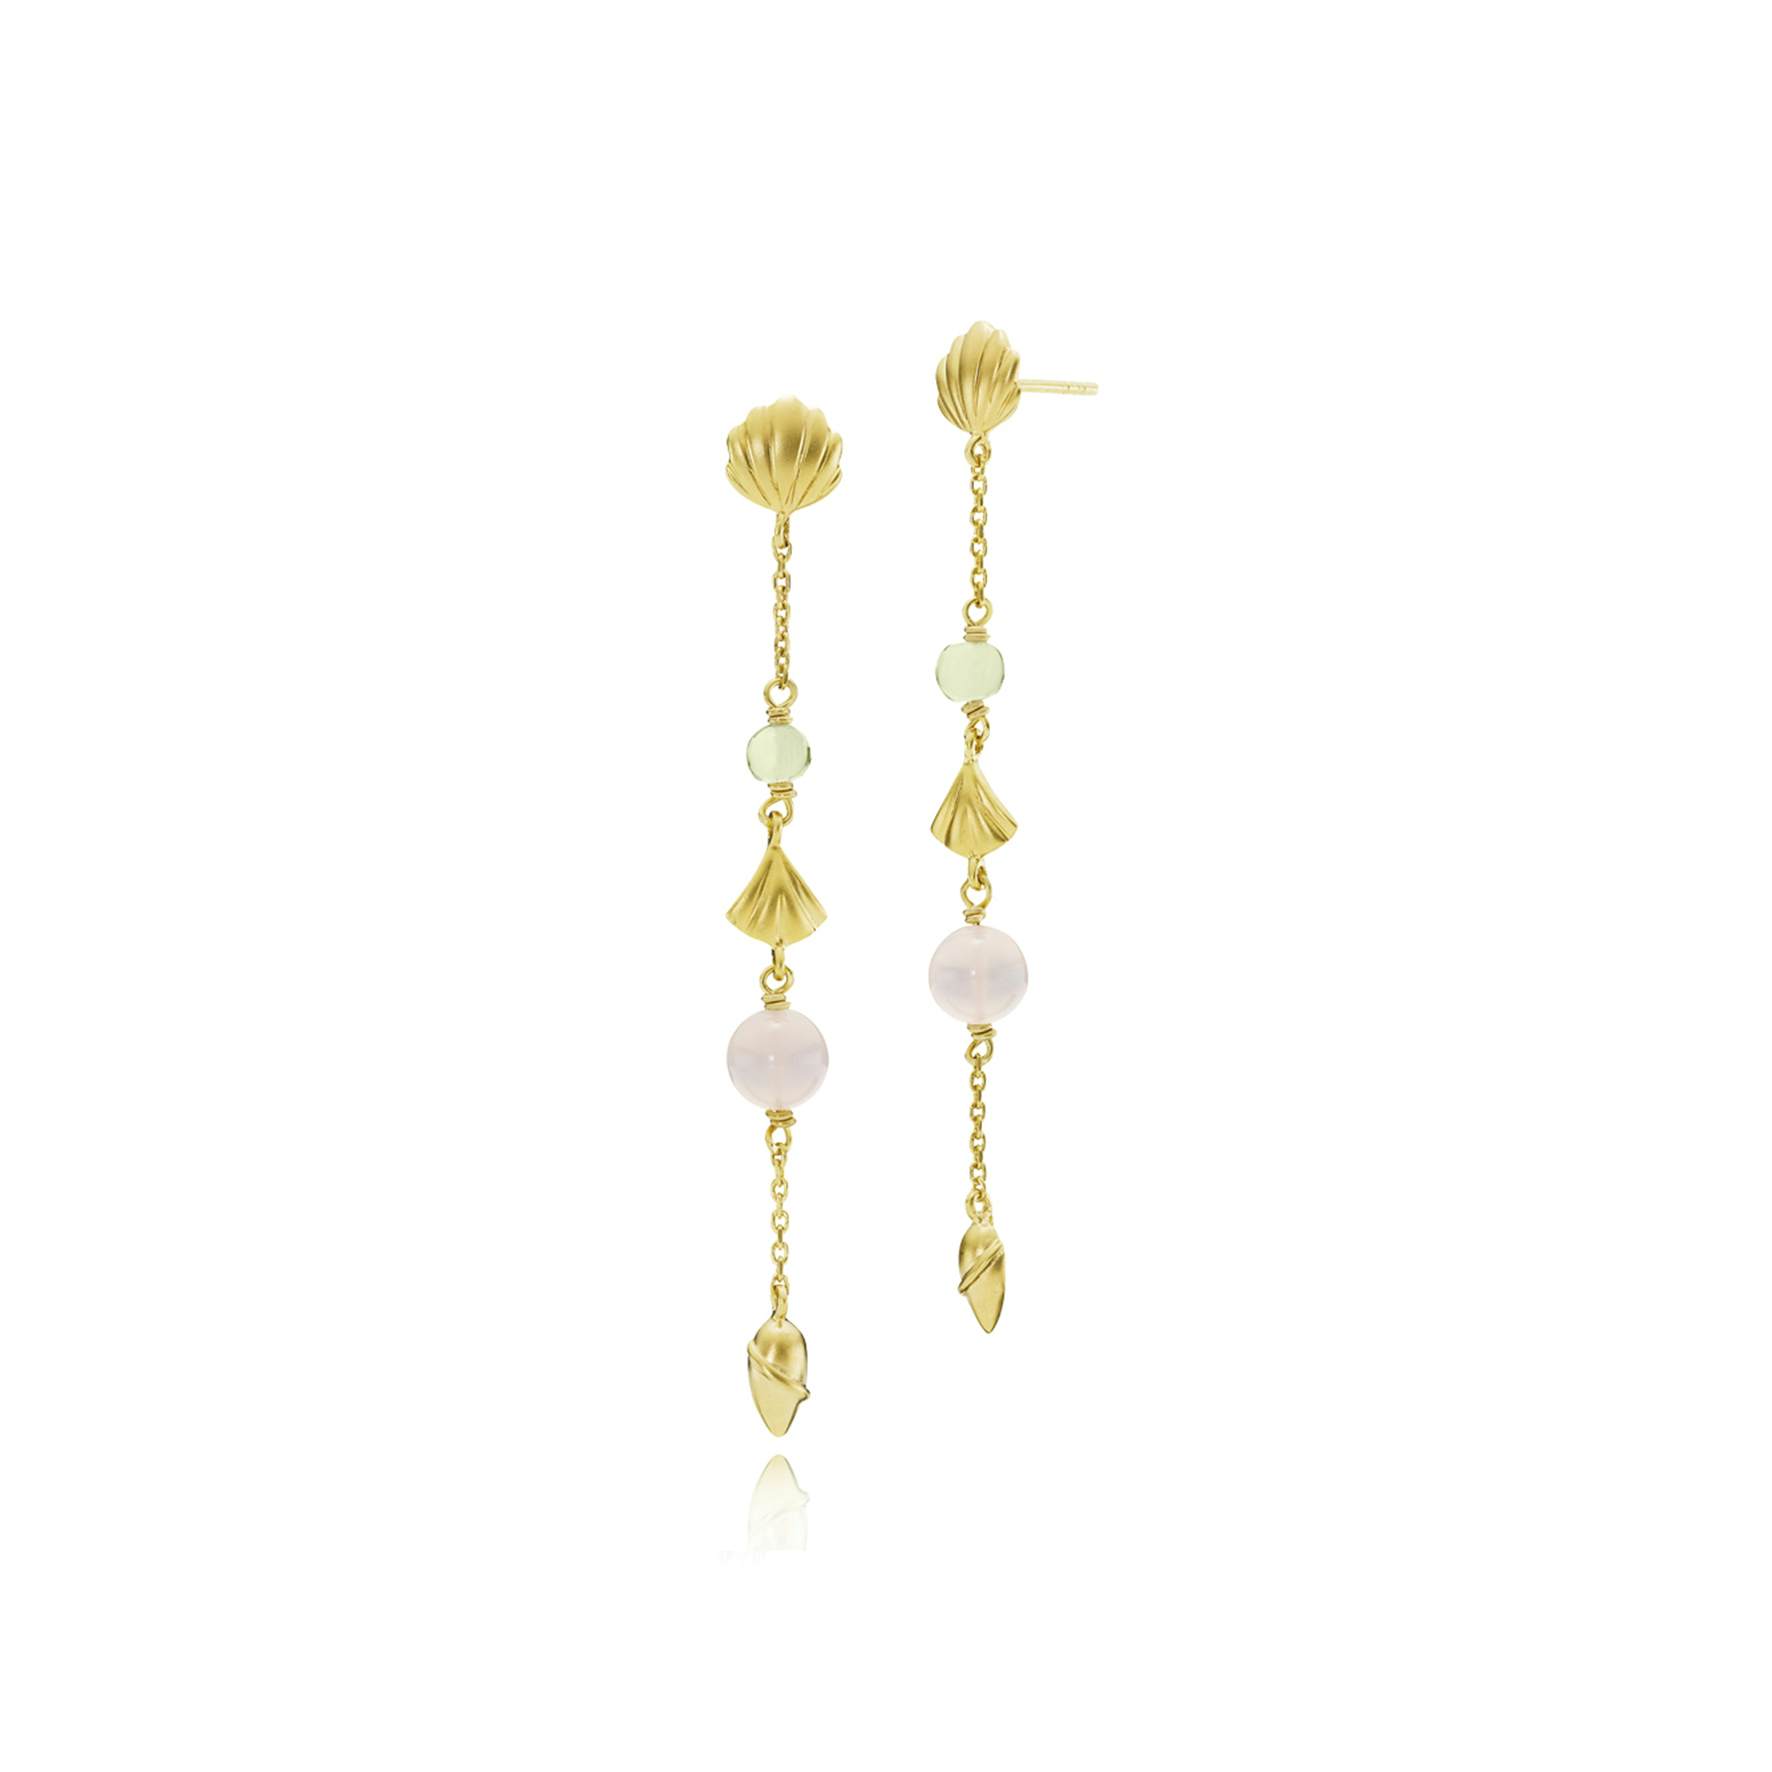 Isabella Pink/Green Long Earrings from Izabel Camille in Goldplated-Silver Sterling 925